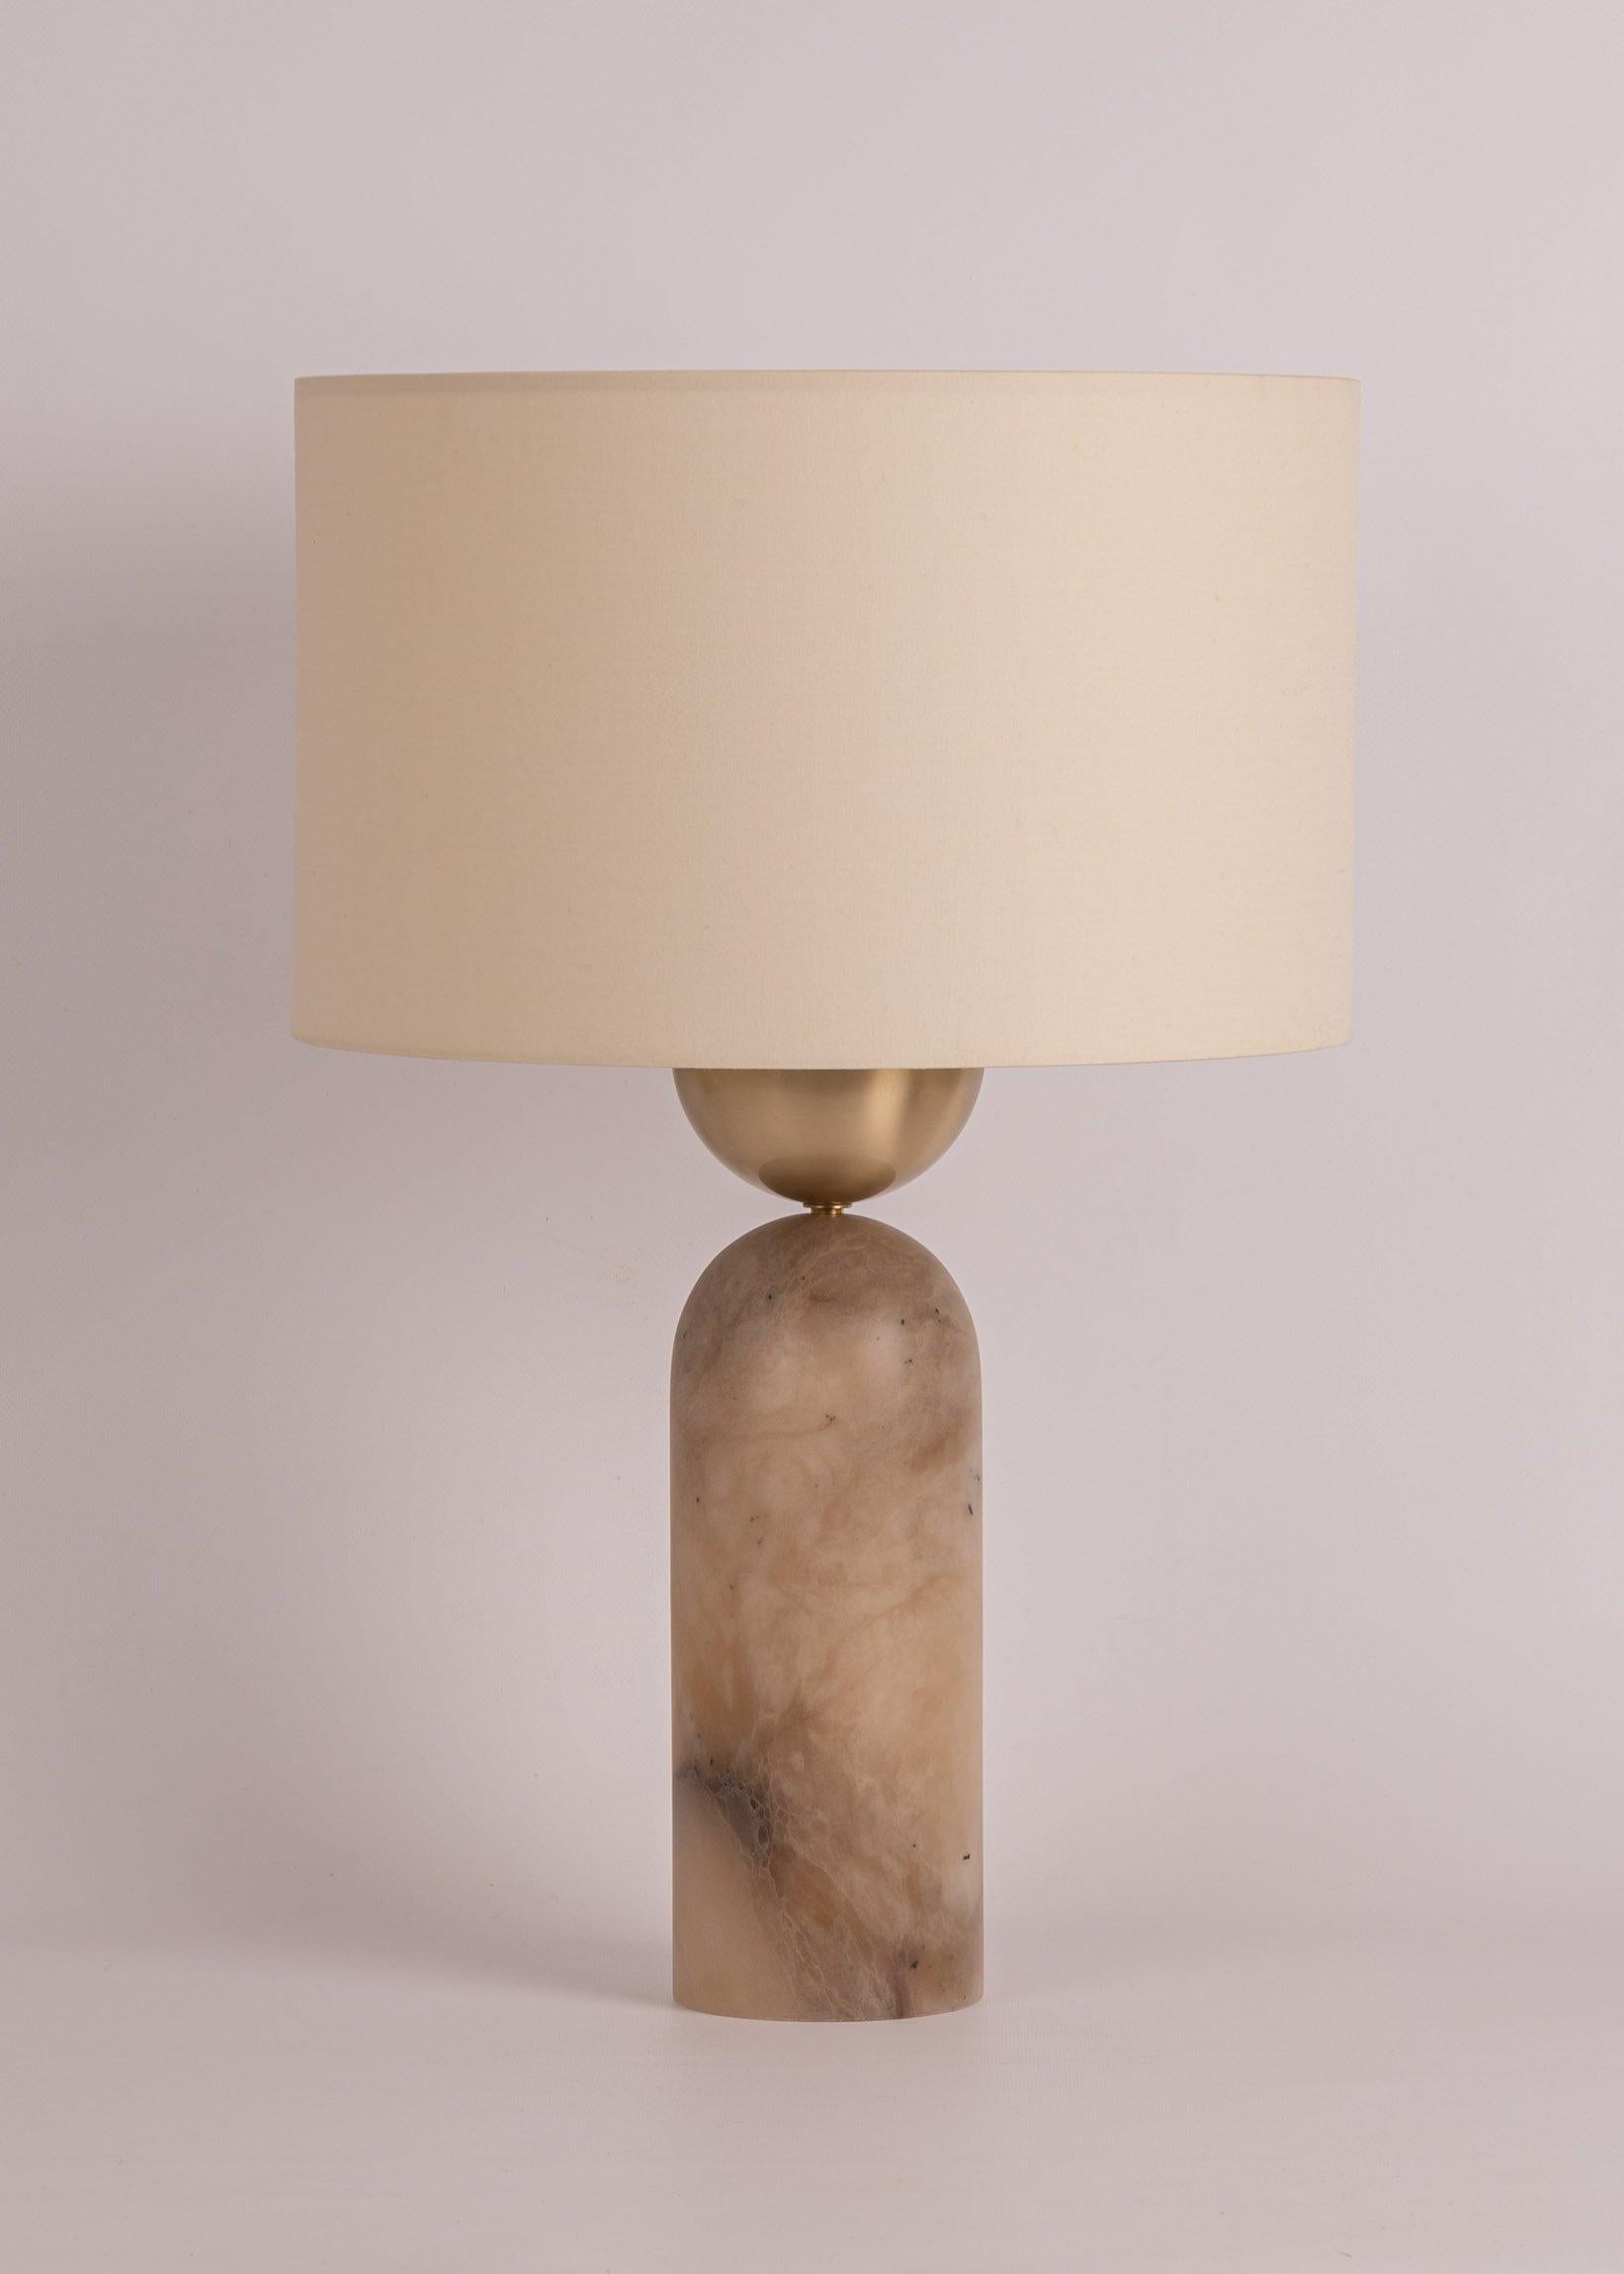 Tobacco Alabaster Peona Table Lamp by Simone & Marcel
Dimensions: Ø 40 x H 61 cm.
Materials: Brass, cotton and tobacco alabaster.

Also available in different marble, wood and alabaster options and finishes. Custom options available on request.